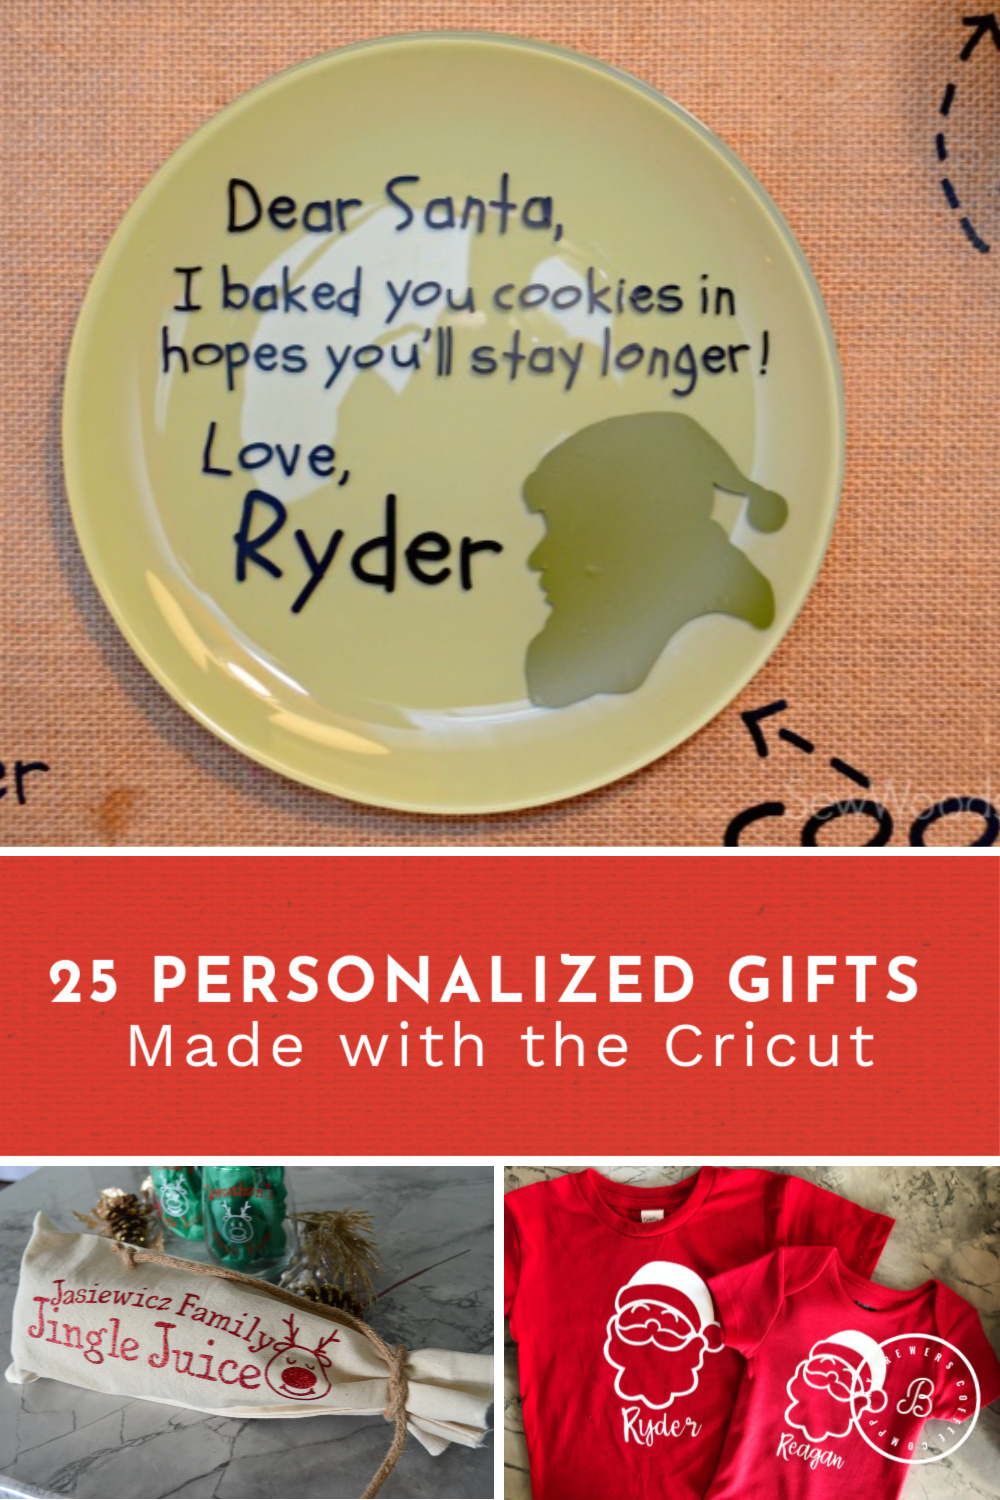 25 Personalized Gifts Made with the Cricut